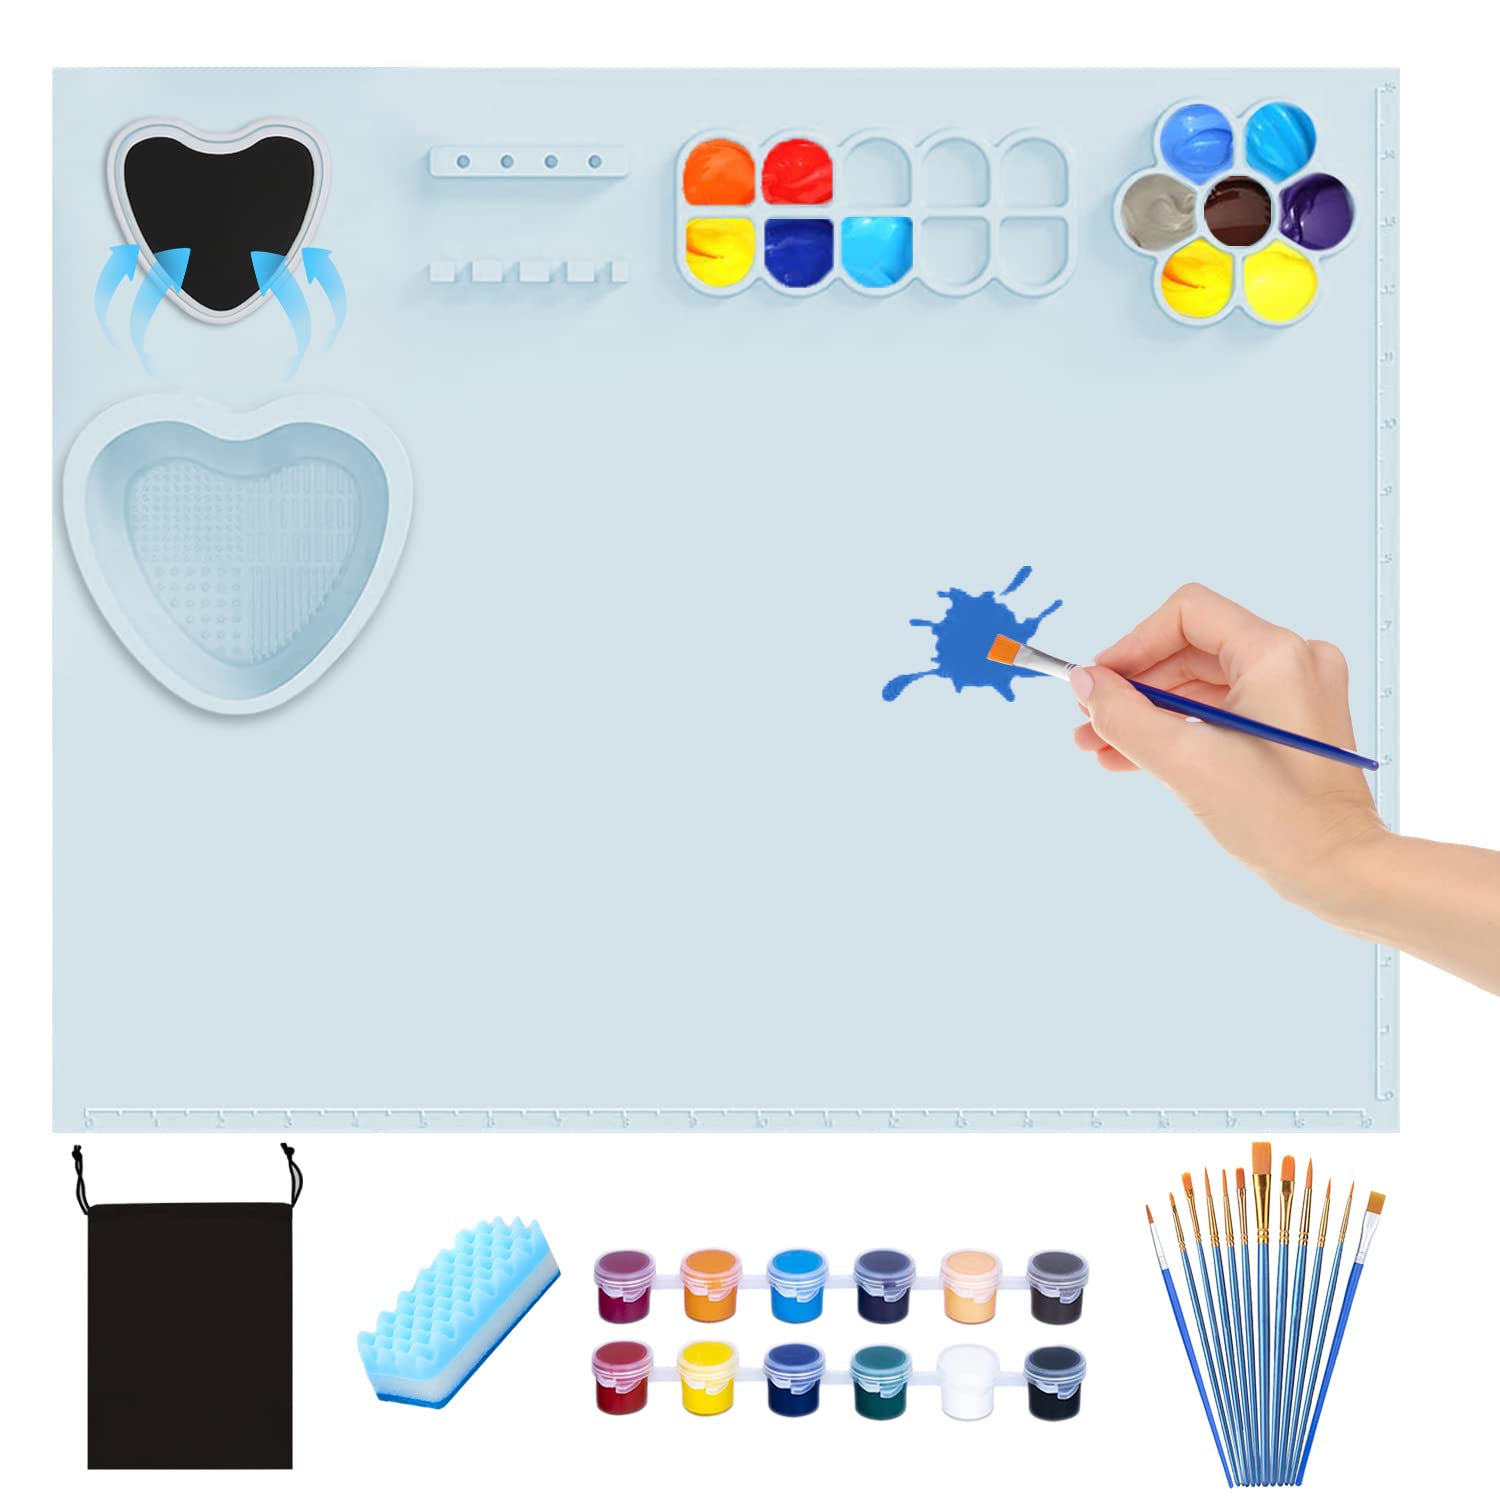 PJOETYONE Silicone Craft Mat with Detachable Cup, 17PCS Silicone Painting  Mat Set for Resin Casting, 20 16 Silicone Art Mat, Art Clay, Silicone  Artist Sheet Set for DIY Creations, Heat Resistant Blue